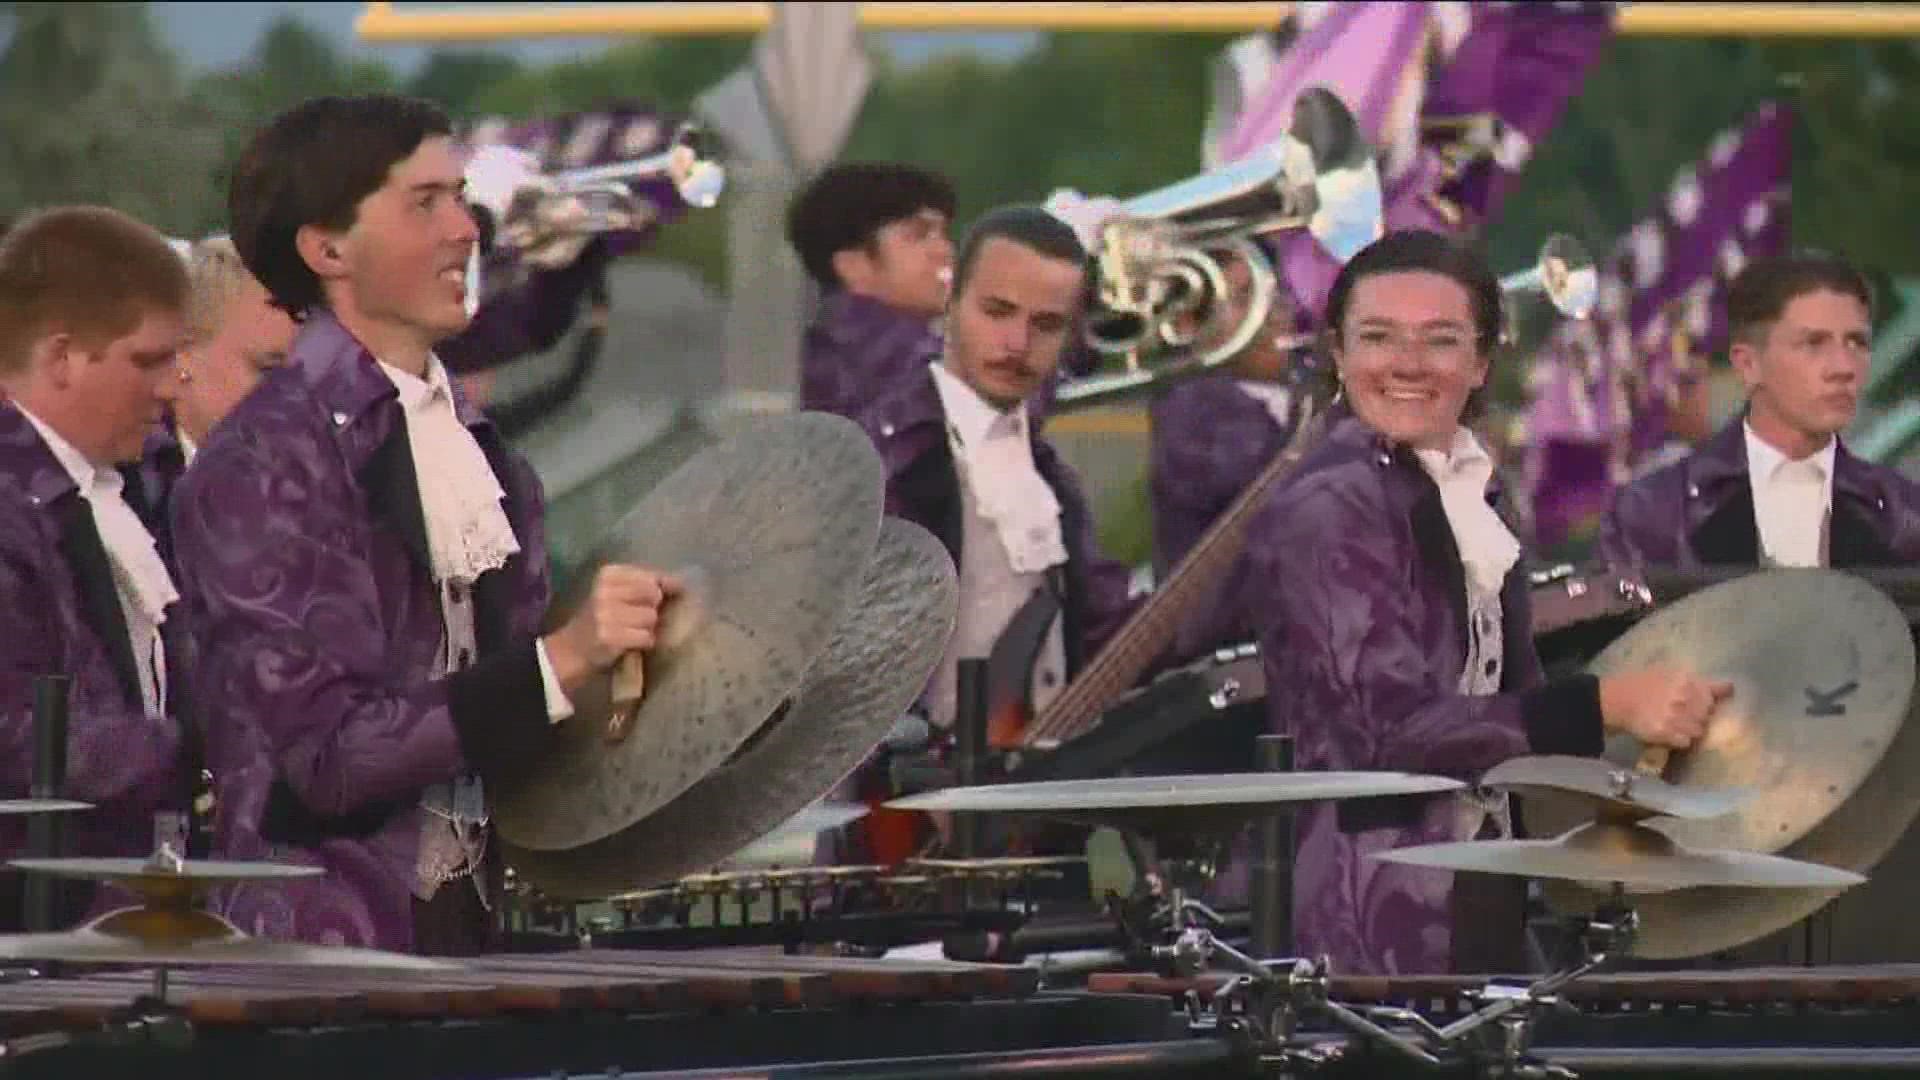 Drum Corps International held a competition at Eagle High School for marching ensembles from across the nation hoping to advance in the DCI World Championships.